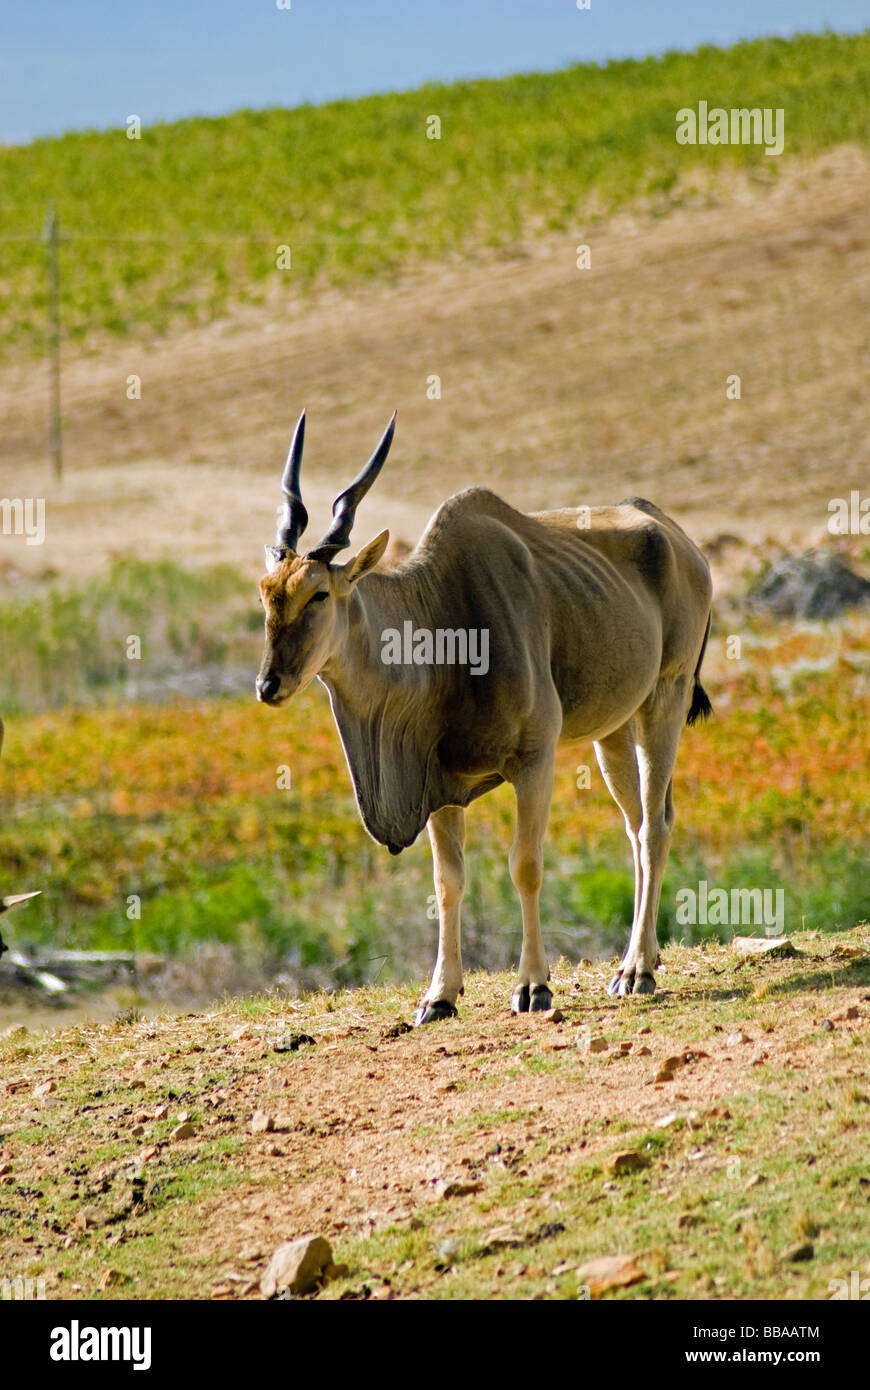 An Eland antelope on game farm near Riebeek Kasteel in the Western Cape, South Africa. Stock Photo